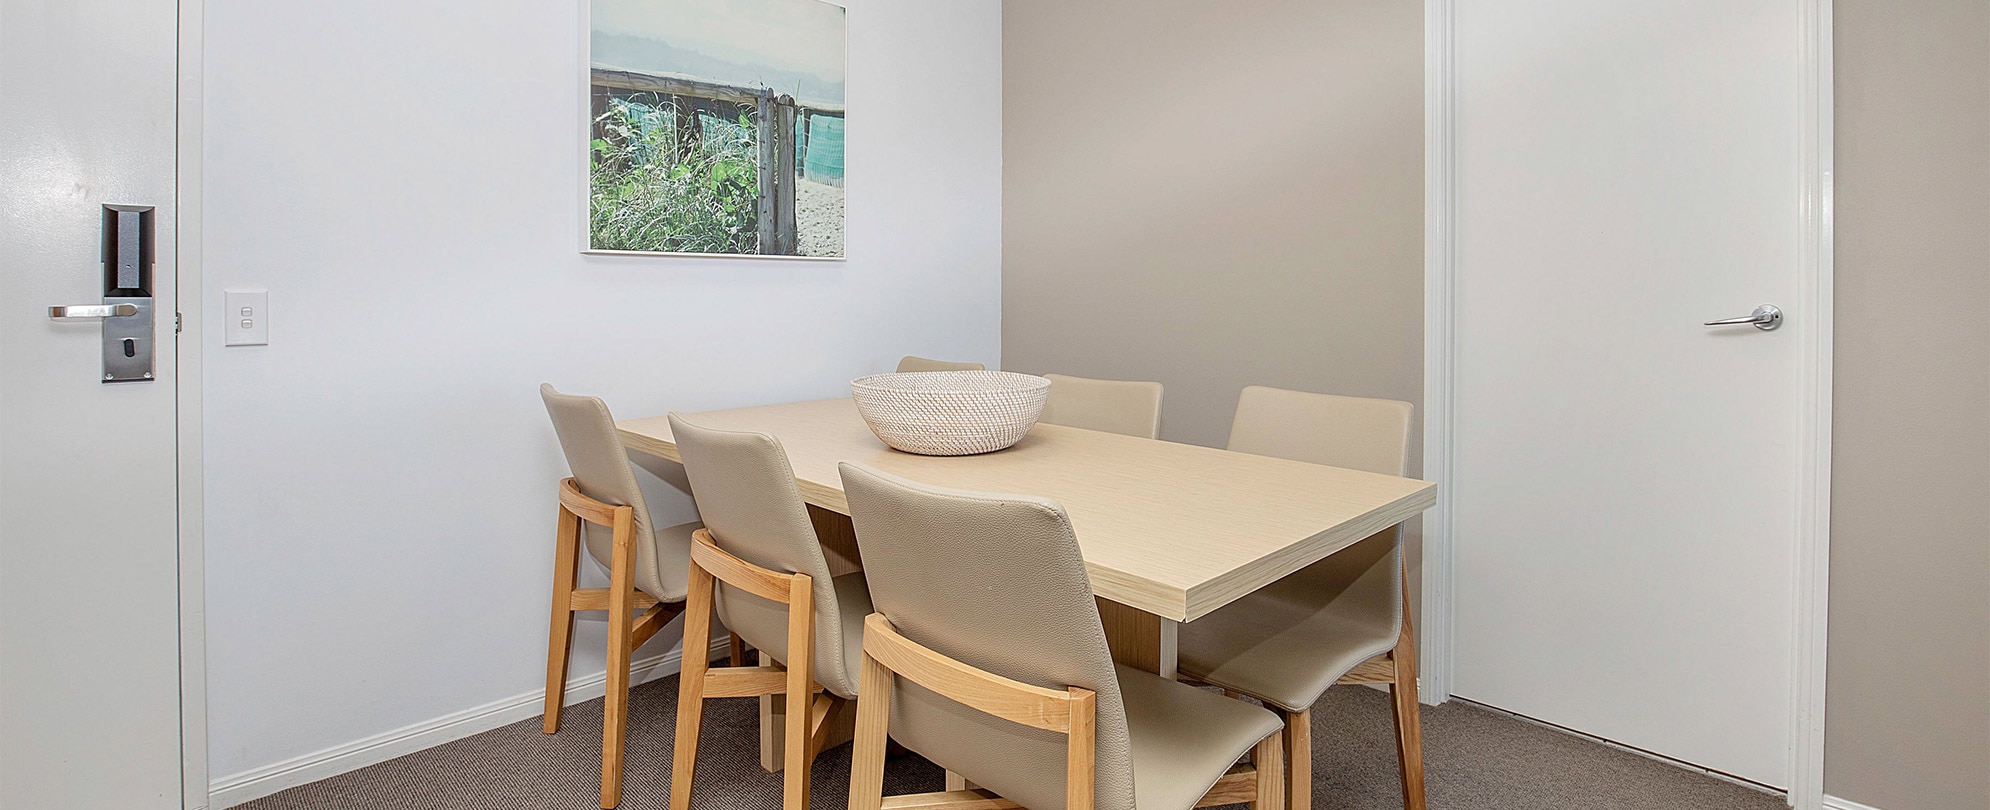 The dining table with 6 chairs in a Club Wyndham Kirra Beach standard suite.